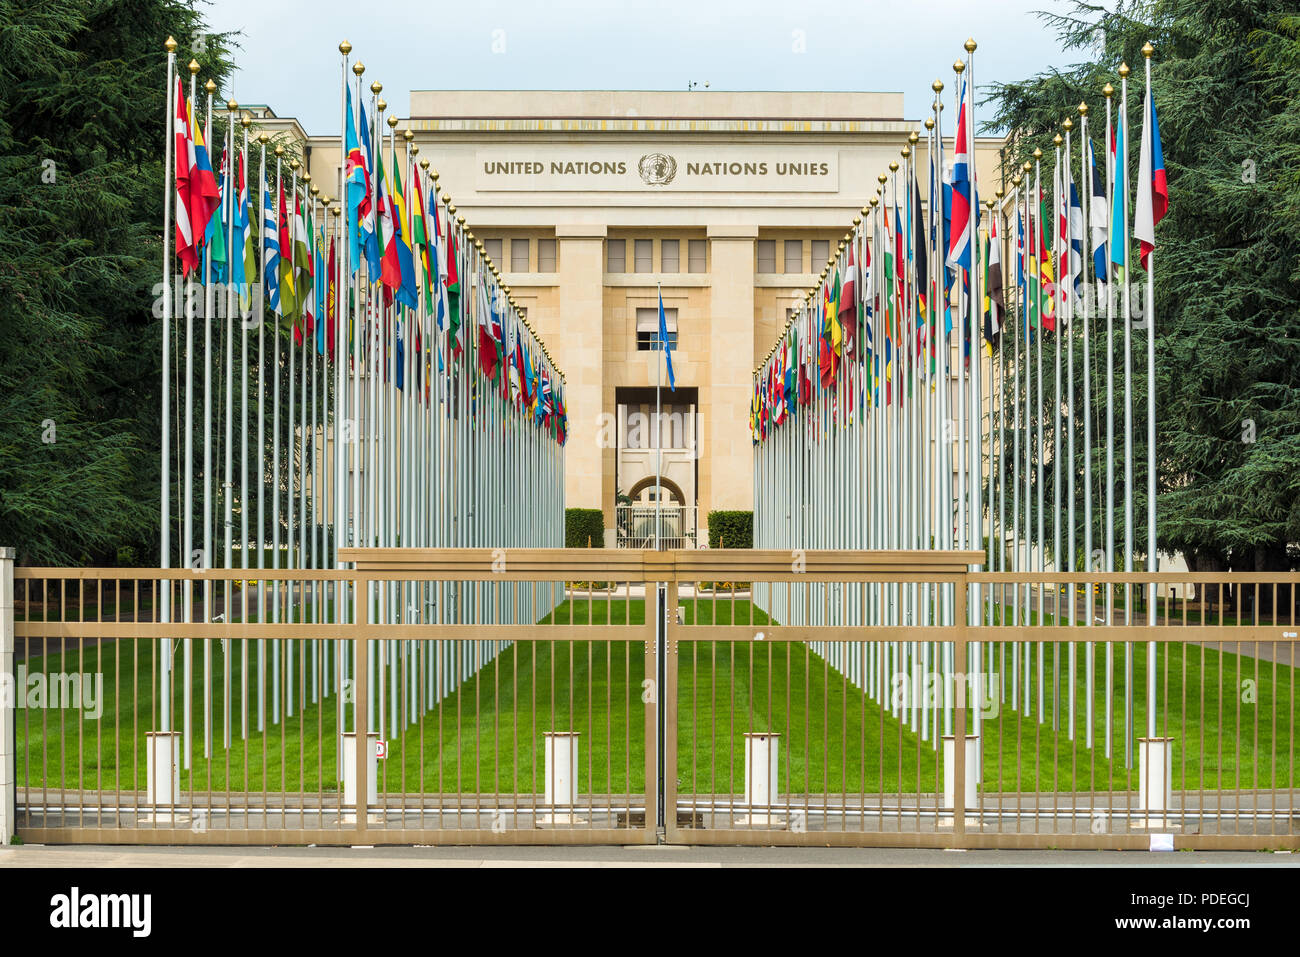 Flags of the members of the United Nations flying from a row of flag poles at eh Nunited Nations headquarters in Geneva, Switzerland Stock Photo